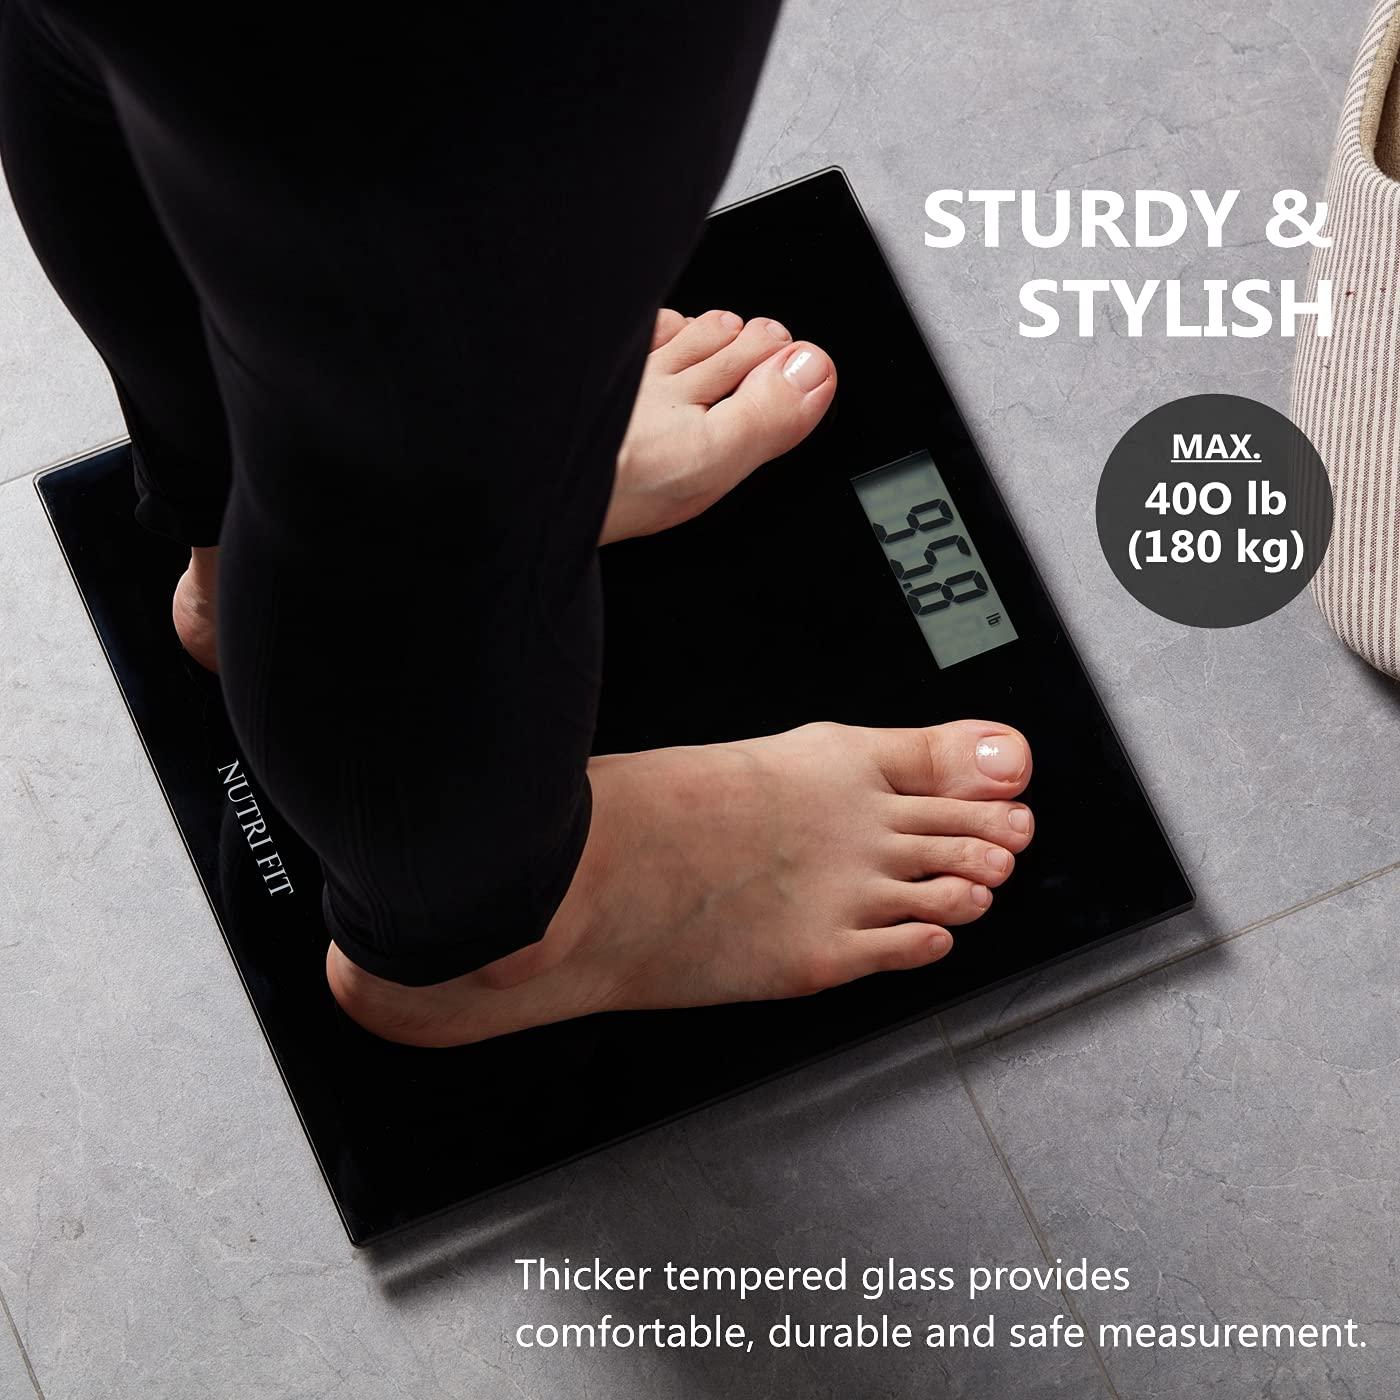 Nutri Fit Digital Body Weight Bathroom Scale BMI Accurate Weight Measurements Scale Large Backlight Display and Step-On Technology 400 Pounds